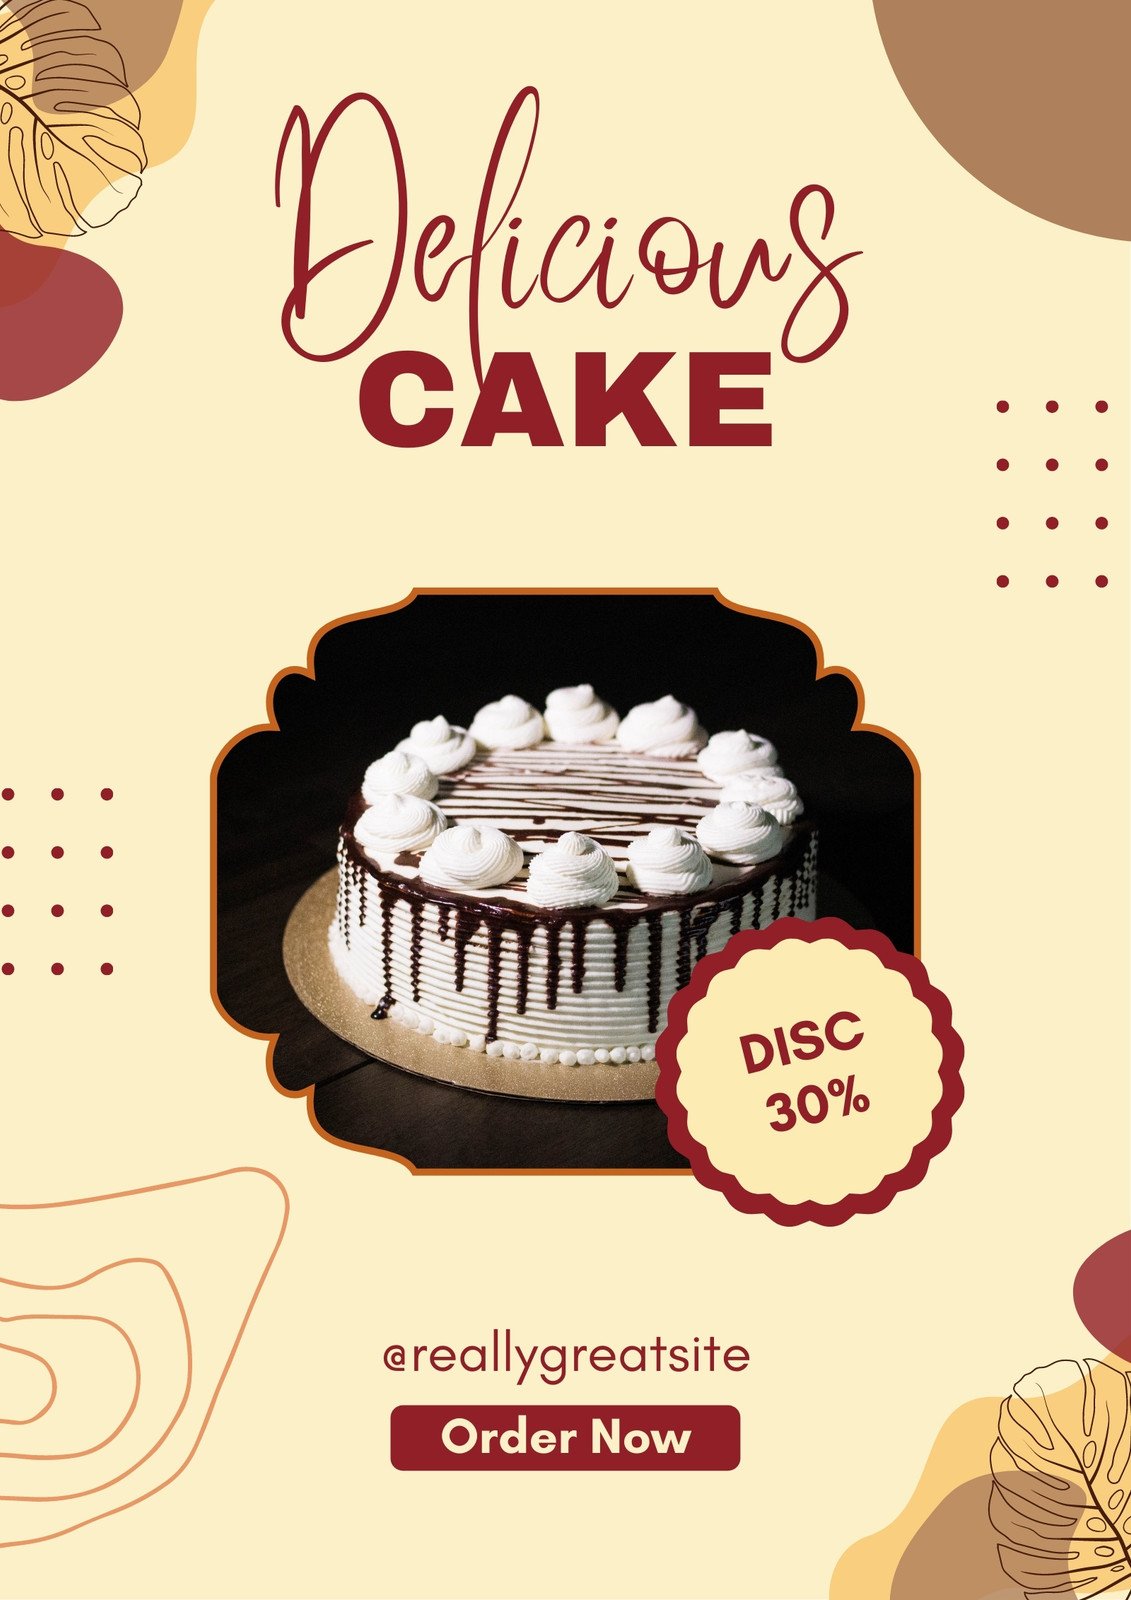 Retro Homemade Cake Poster Design Vector for Free Download | FreeImages